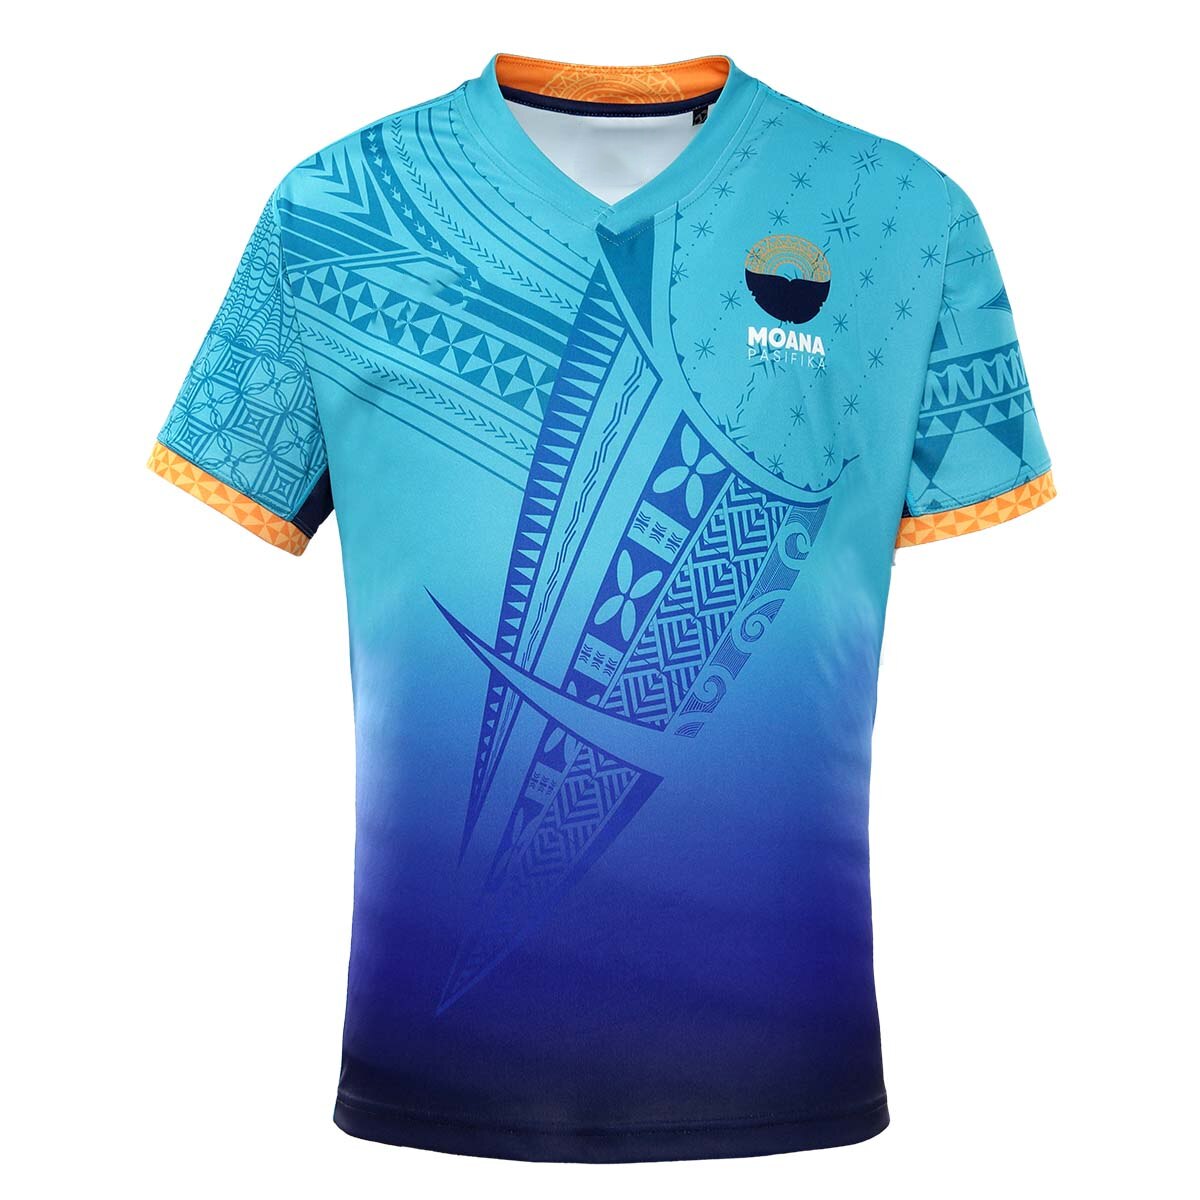 New Men's Moana Pacifica Home Rugby Jersey, Shirt